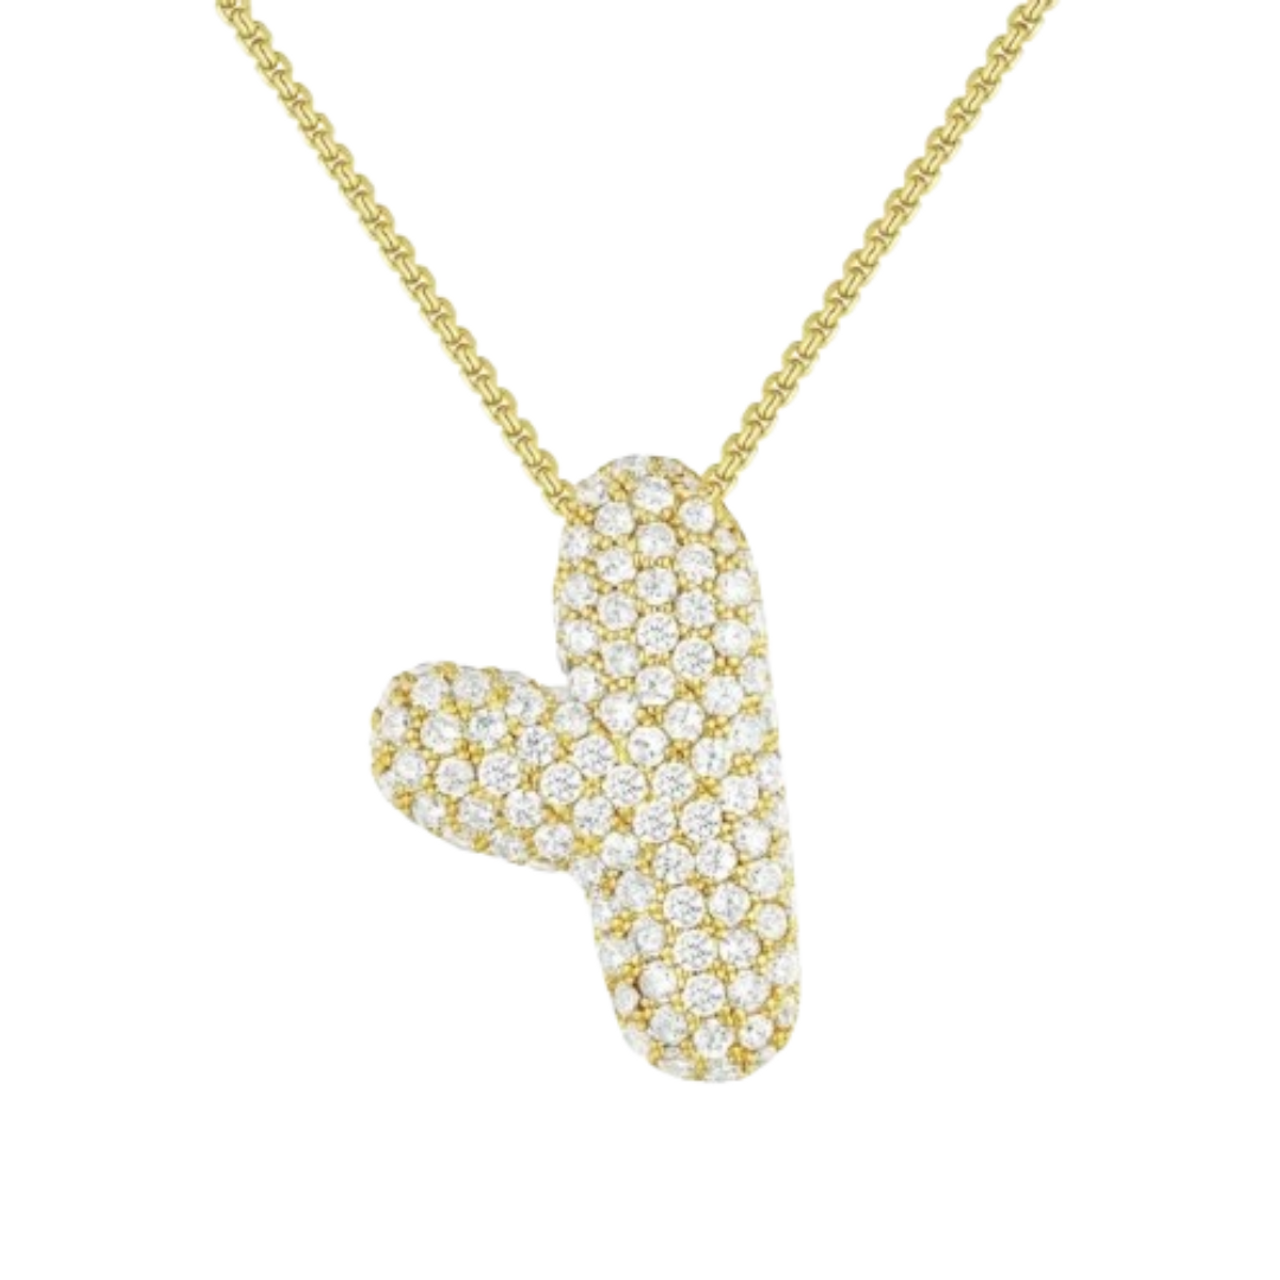 Triple AAA Cubic Zirconia Initial Necklace with Gold Plating product image